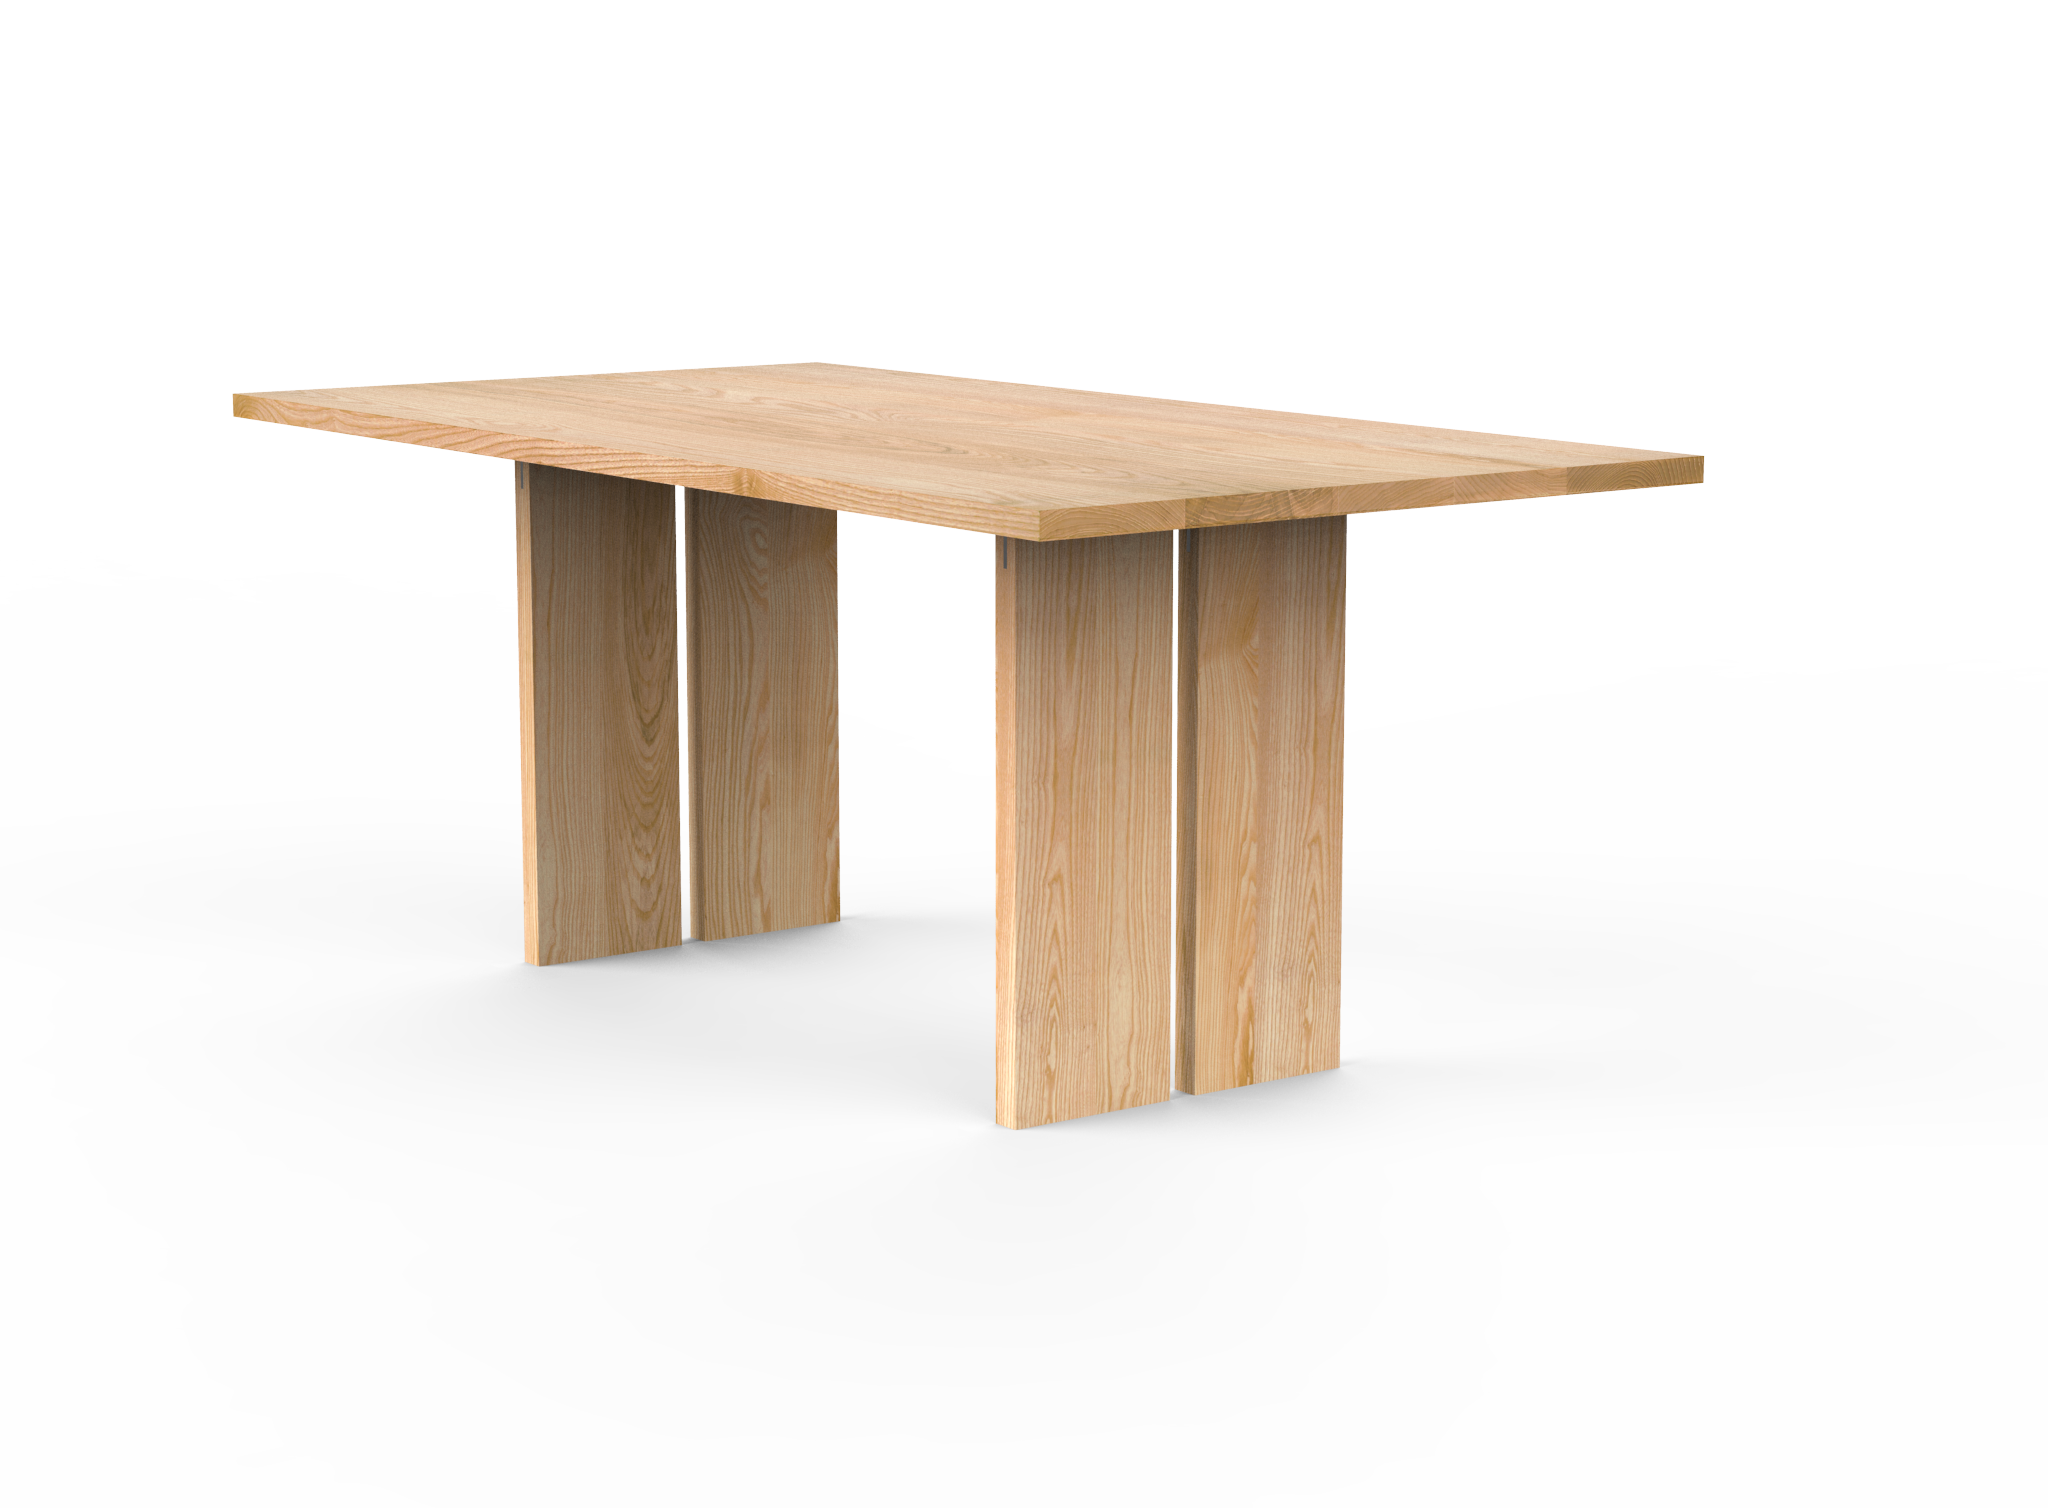 Vermont Farm Table Custom Wood Dining Table Together Ash 